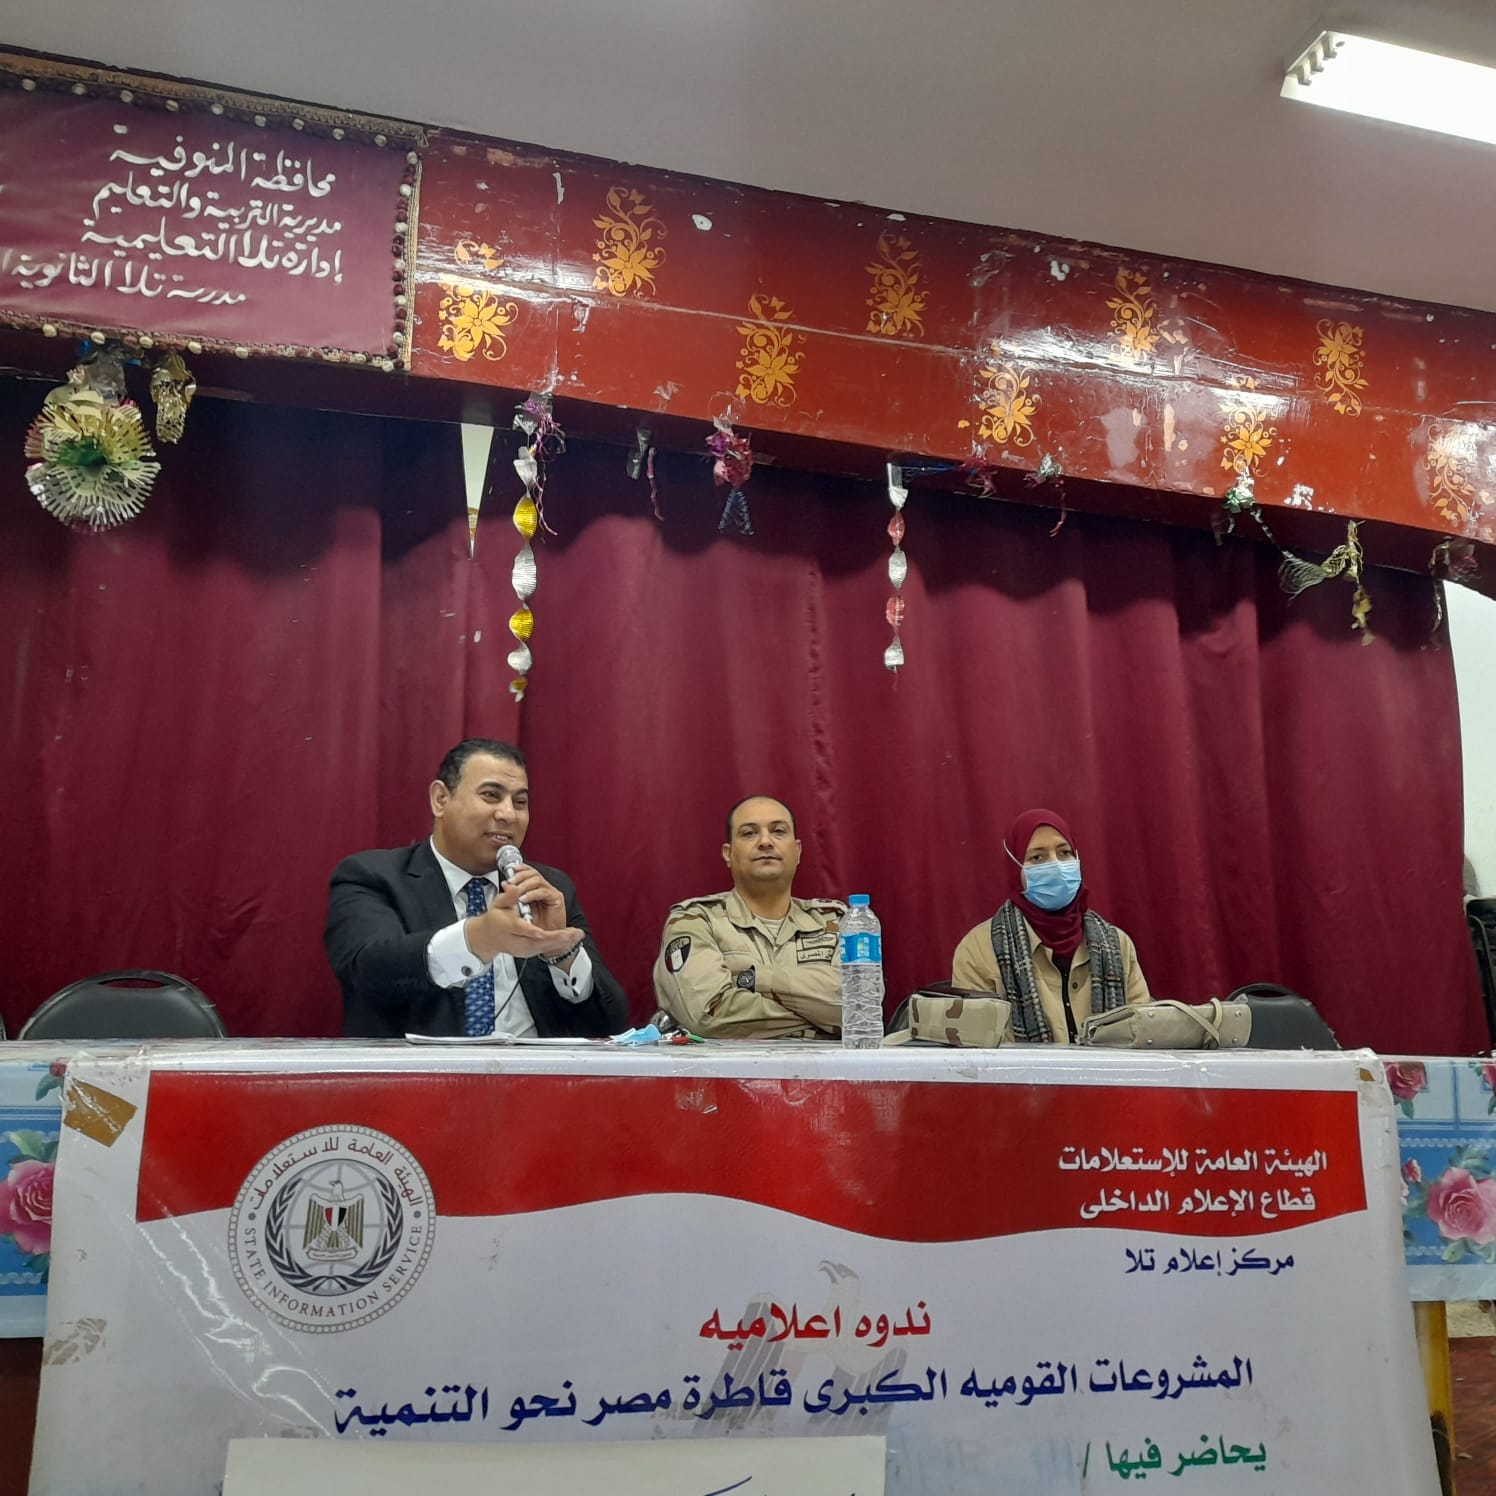 The launch of the activities of the Environmental Week at the Faculty of Mass Communication with an awareness seminar on national projects and youth awareness of presidential initiatives